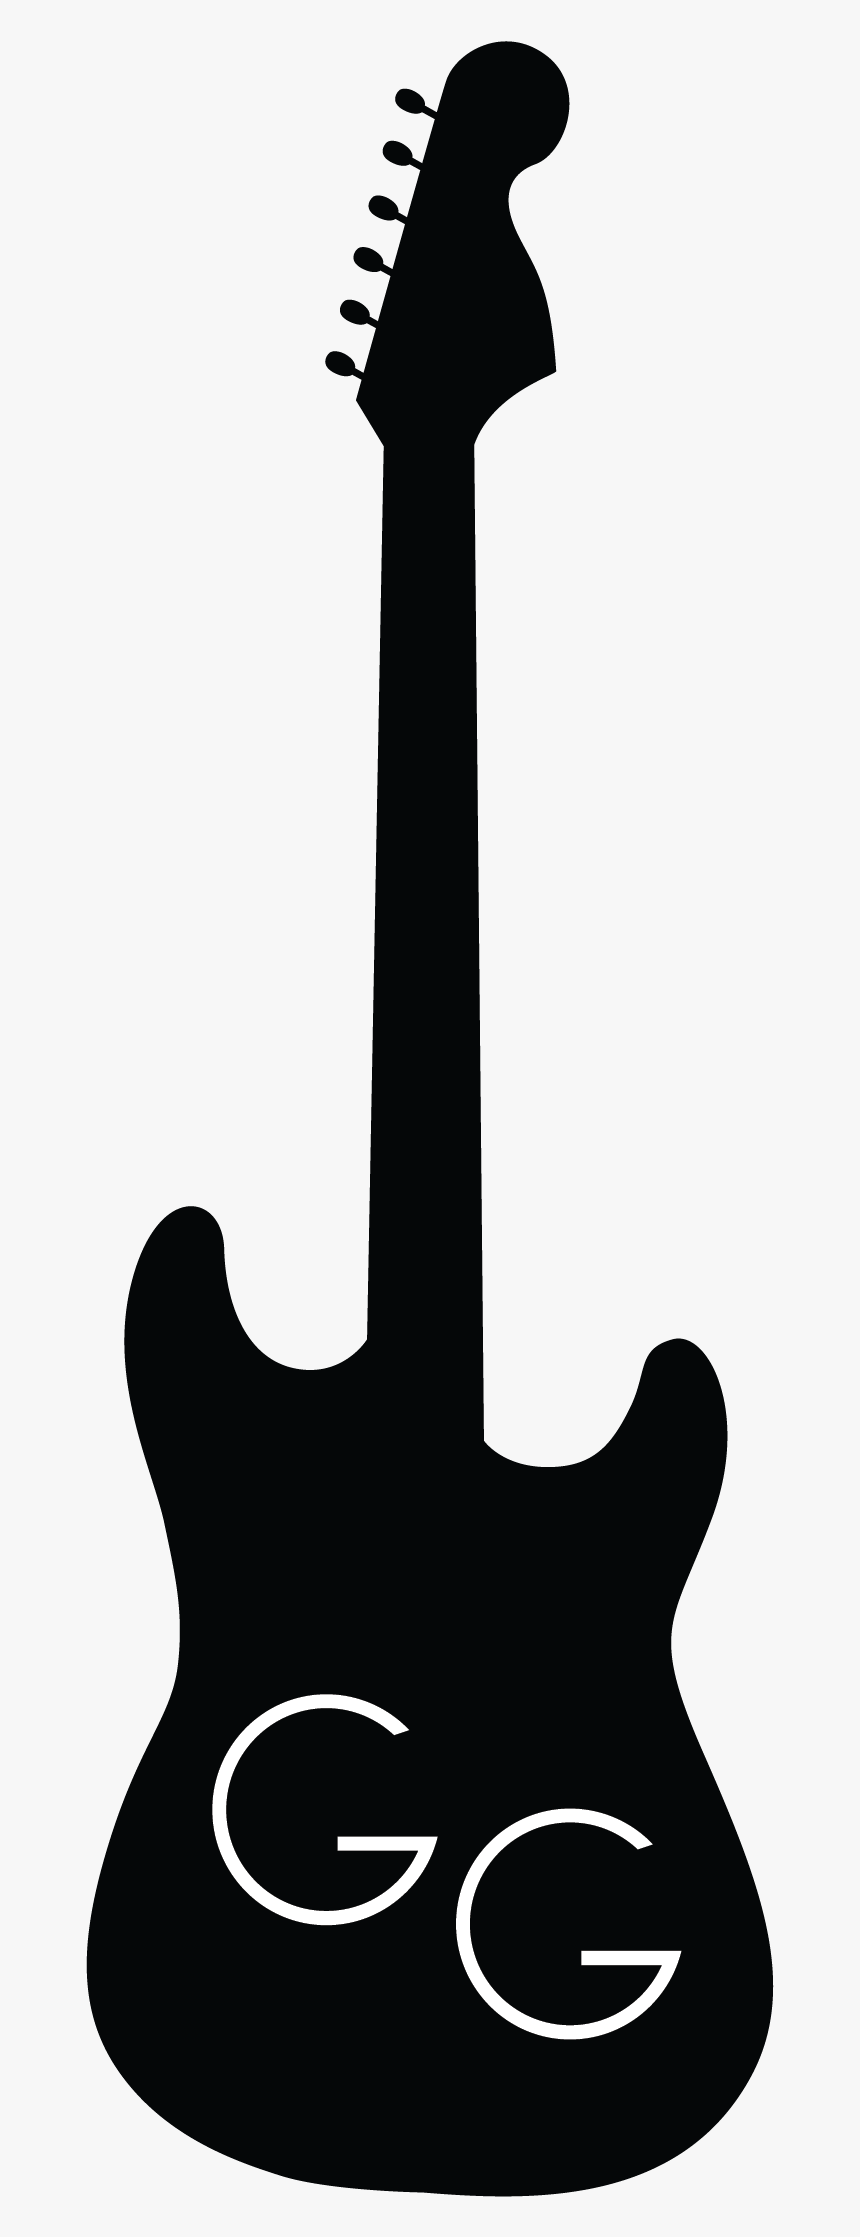 Music Notes Silhouette Png, Transparent Png, Free Download